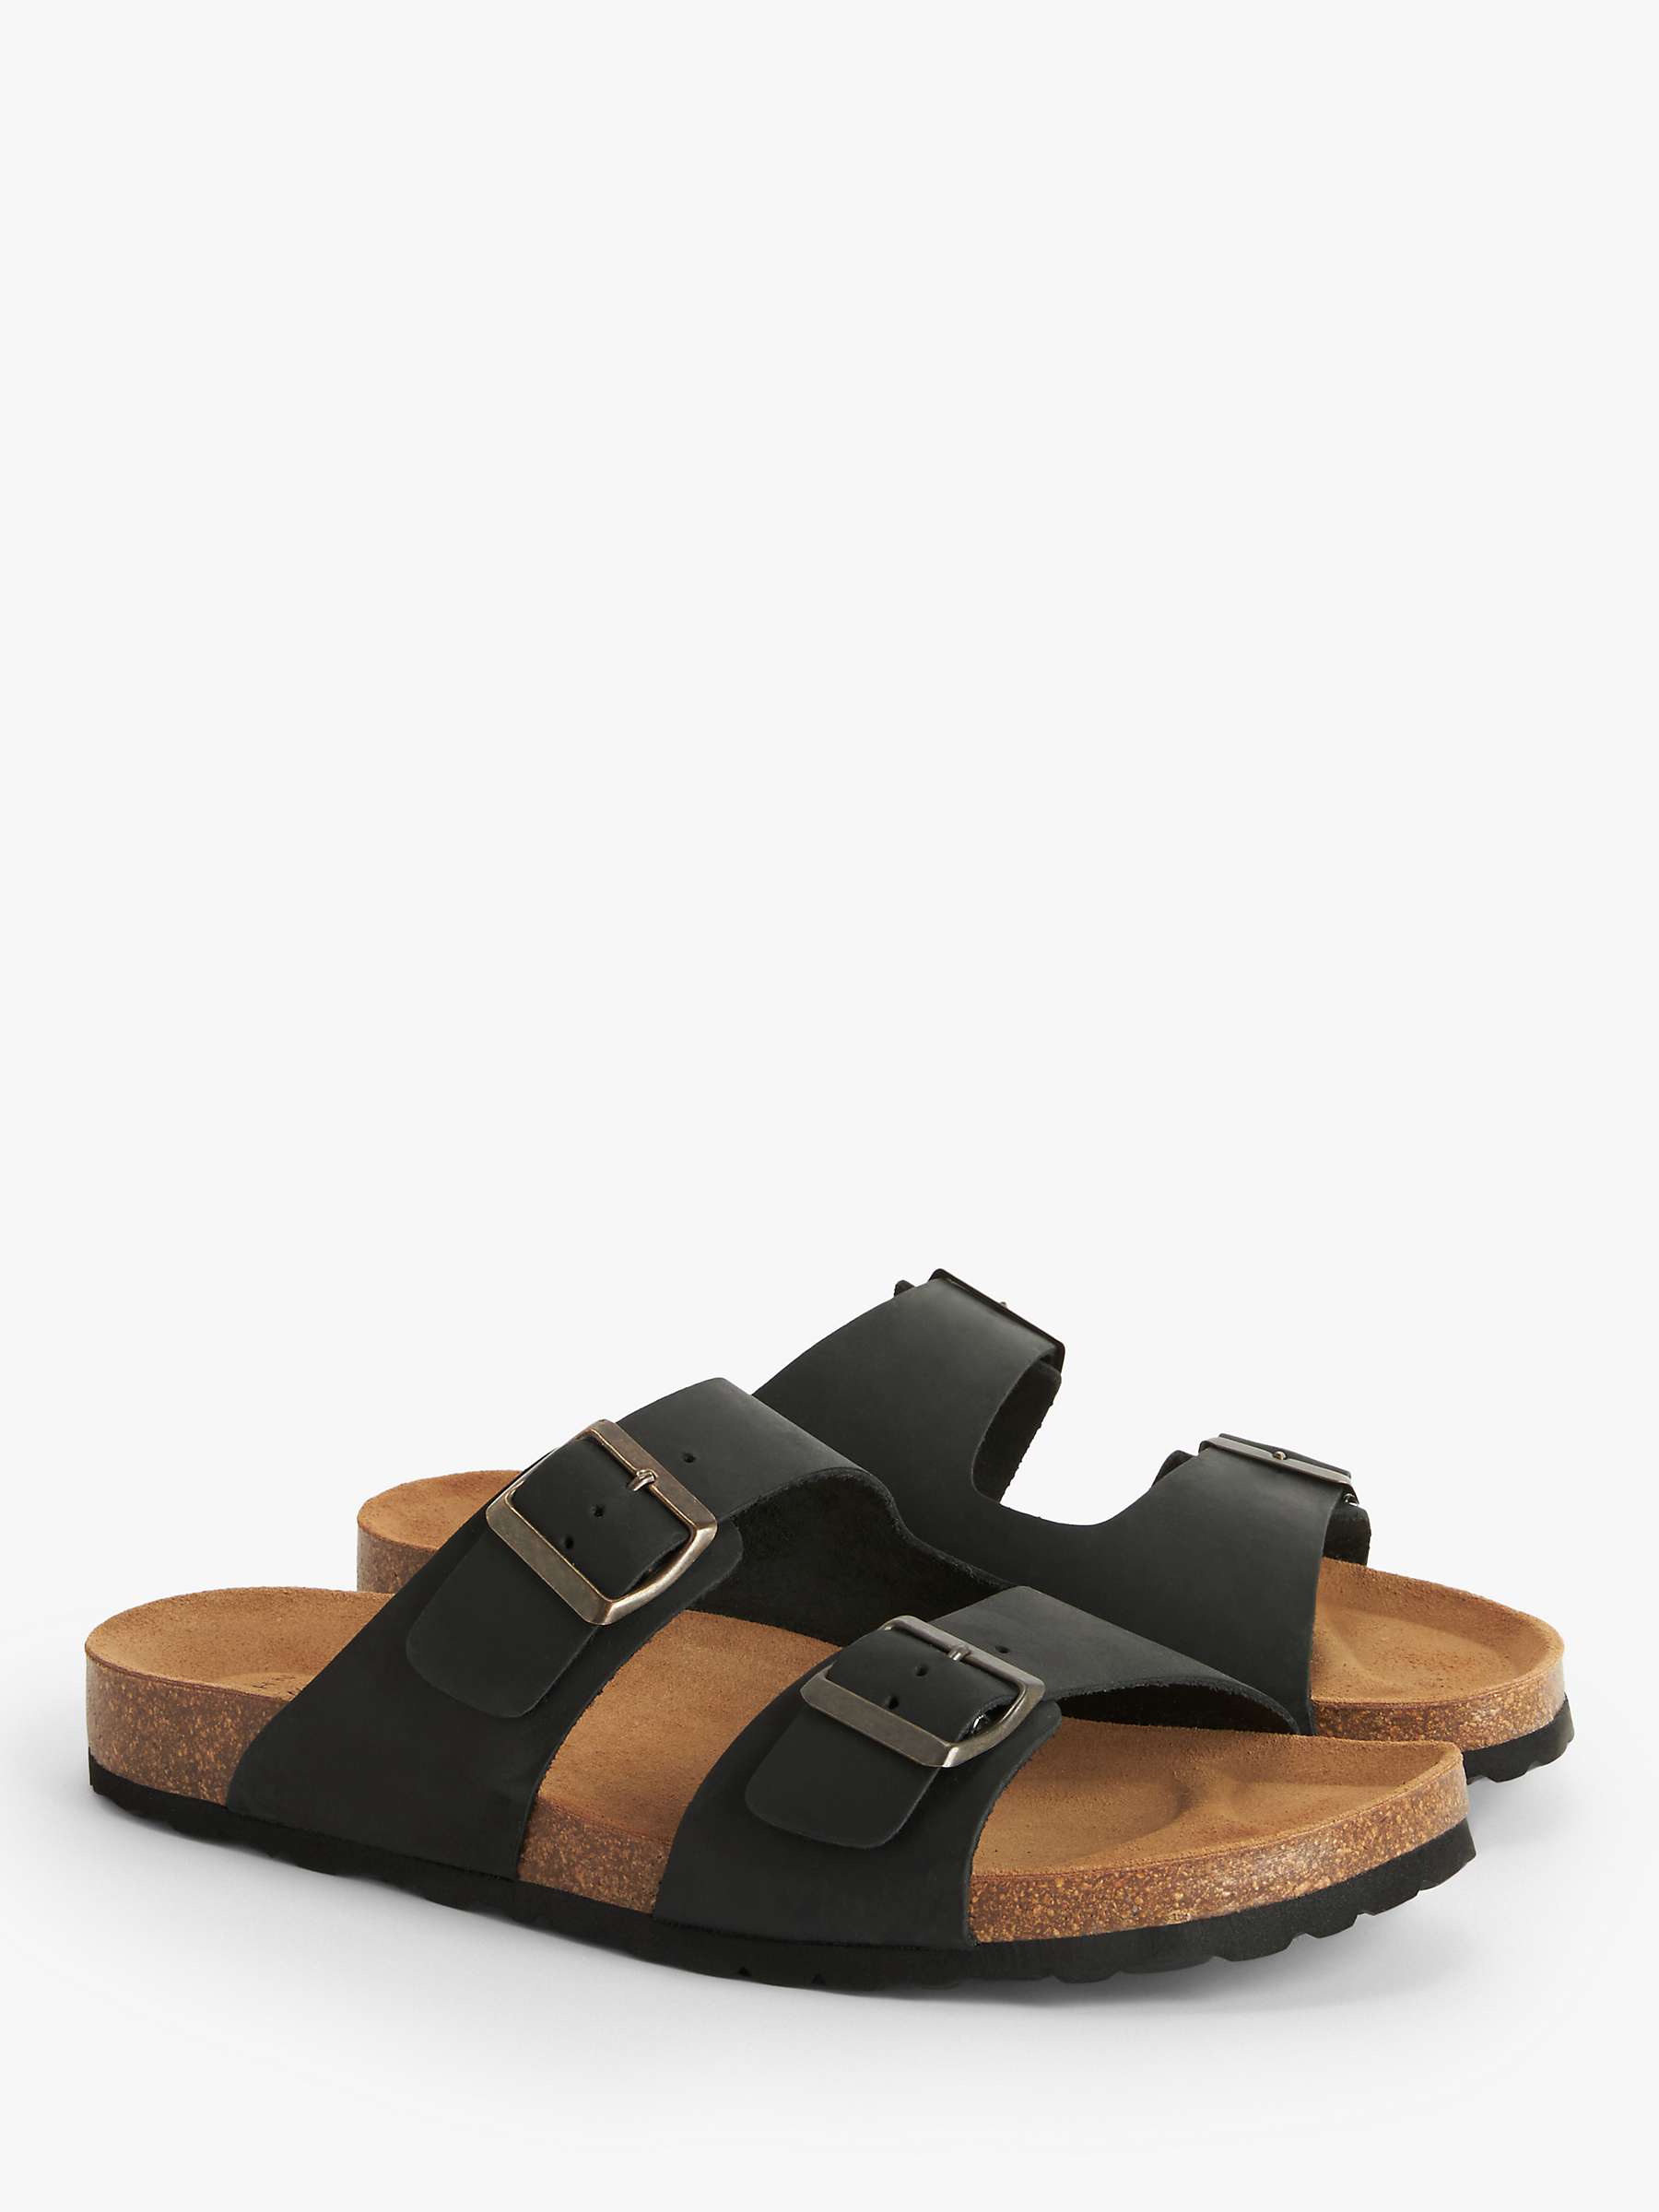 Buy John Lewis Two Strap Footbed Leather Sandals Online at johnlewis.com